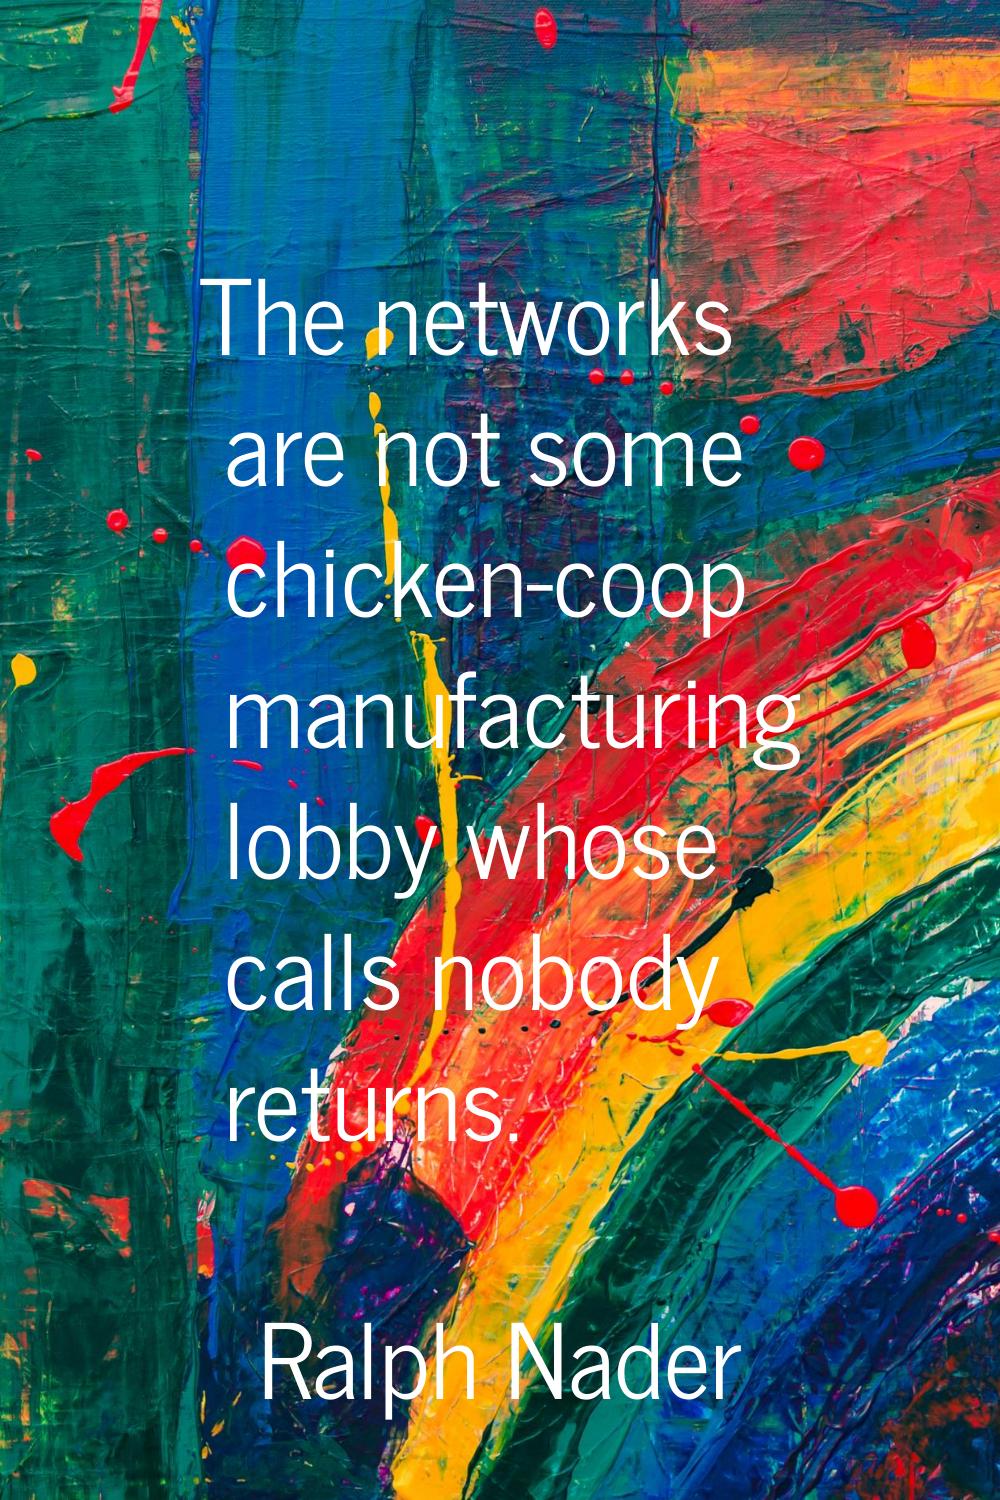 The networks are not some chicken-coop manufacturing lobby whose calls nobody returns.